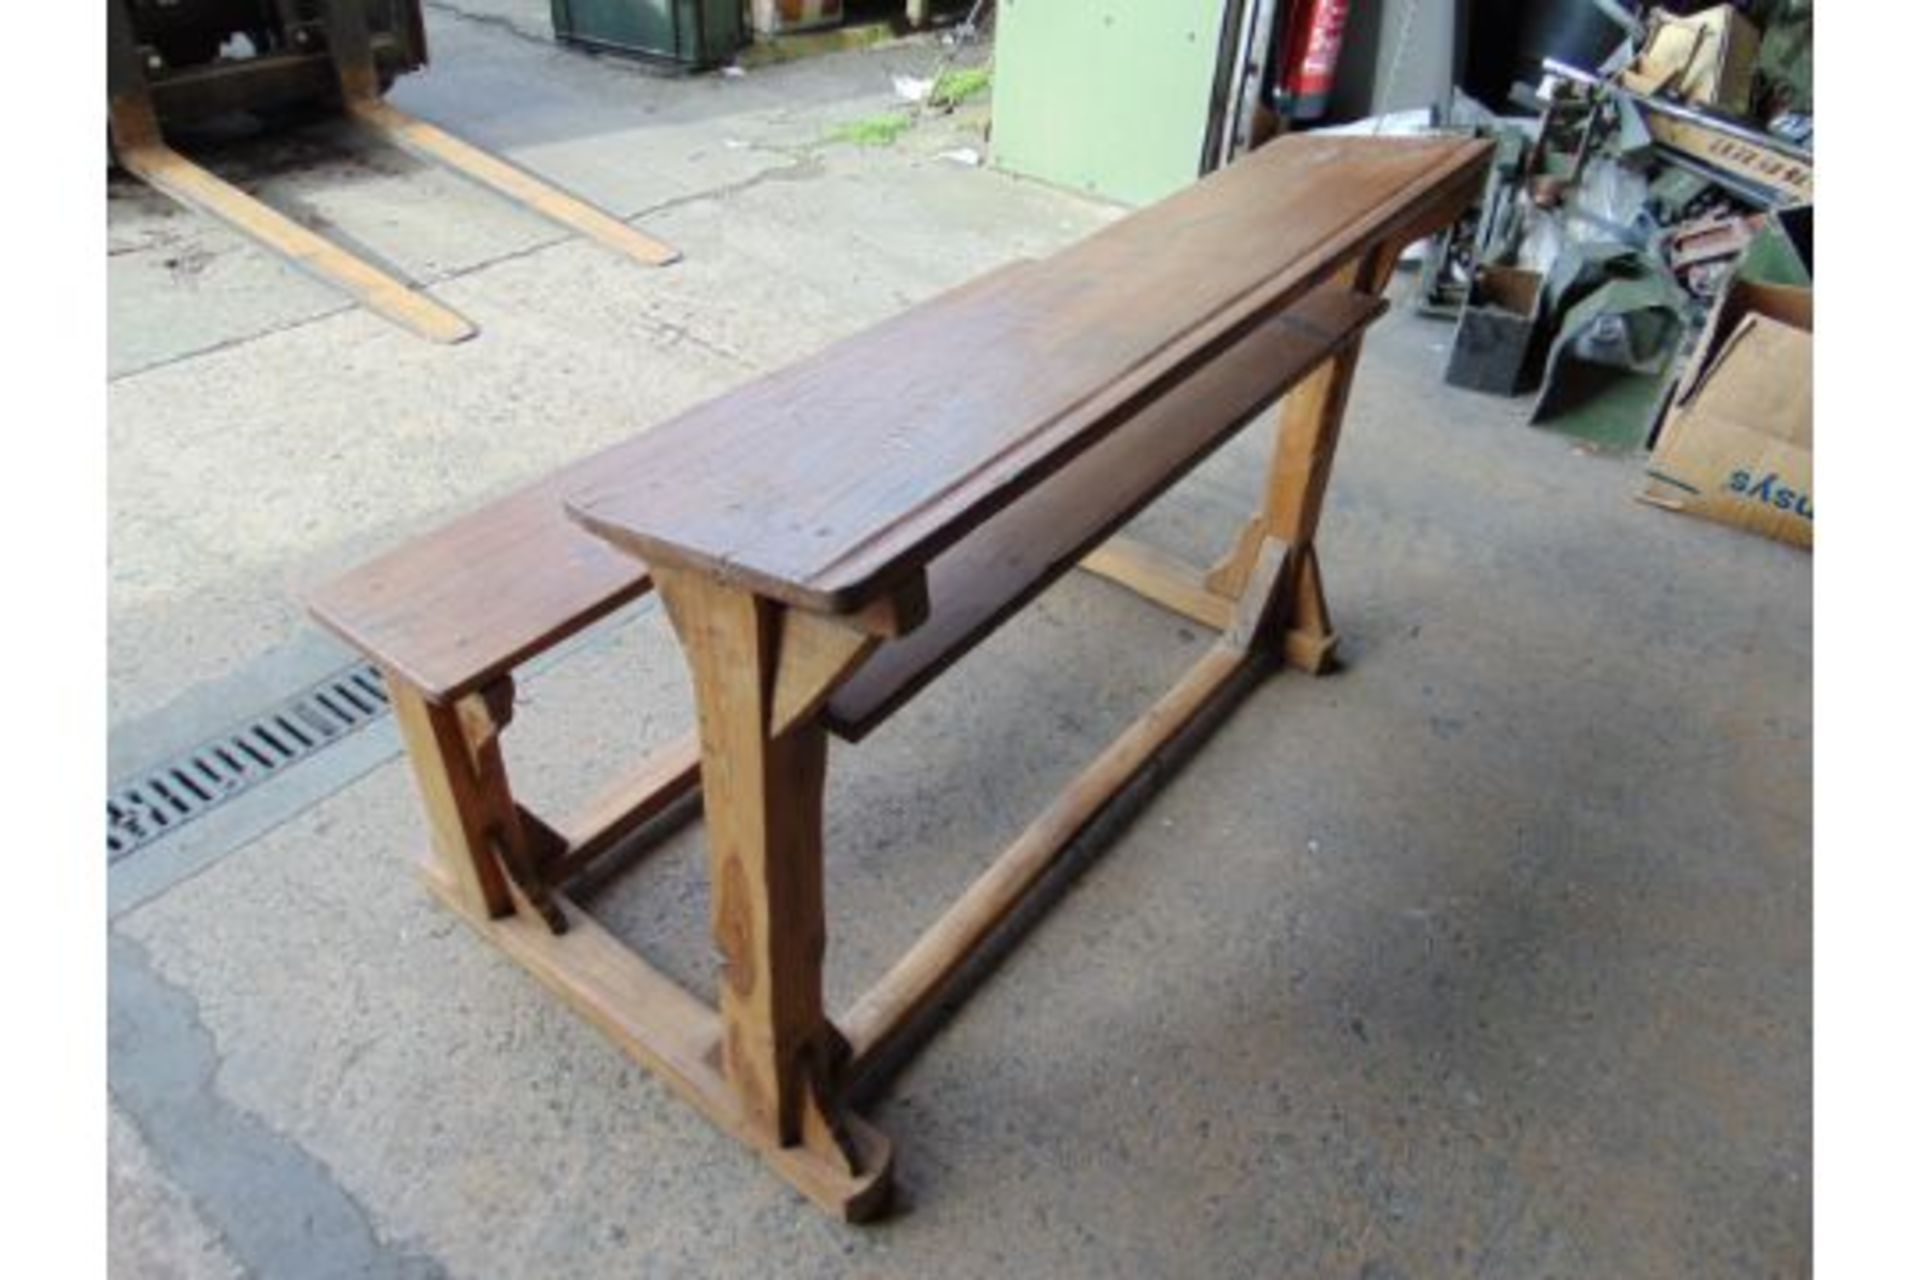 Antique Traditional Wooden School Bench Desk - Image 6 of 6